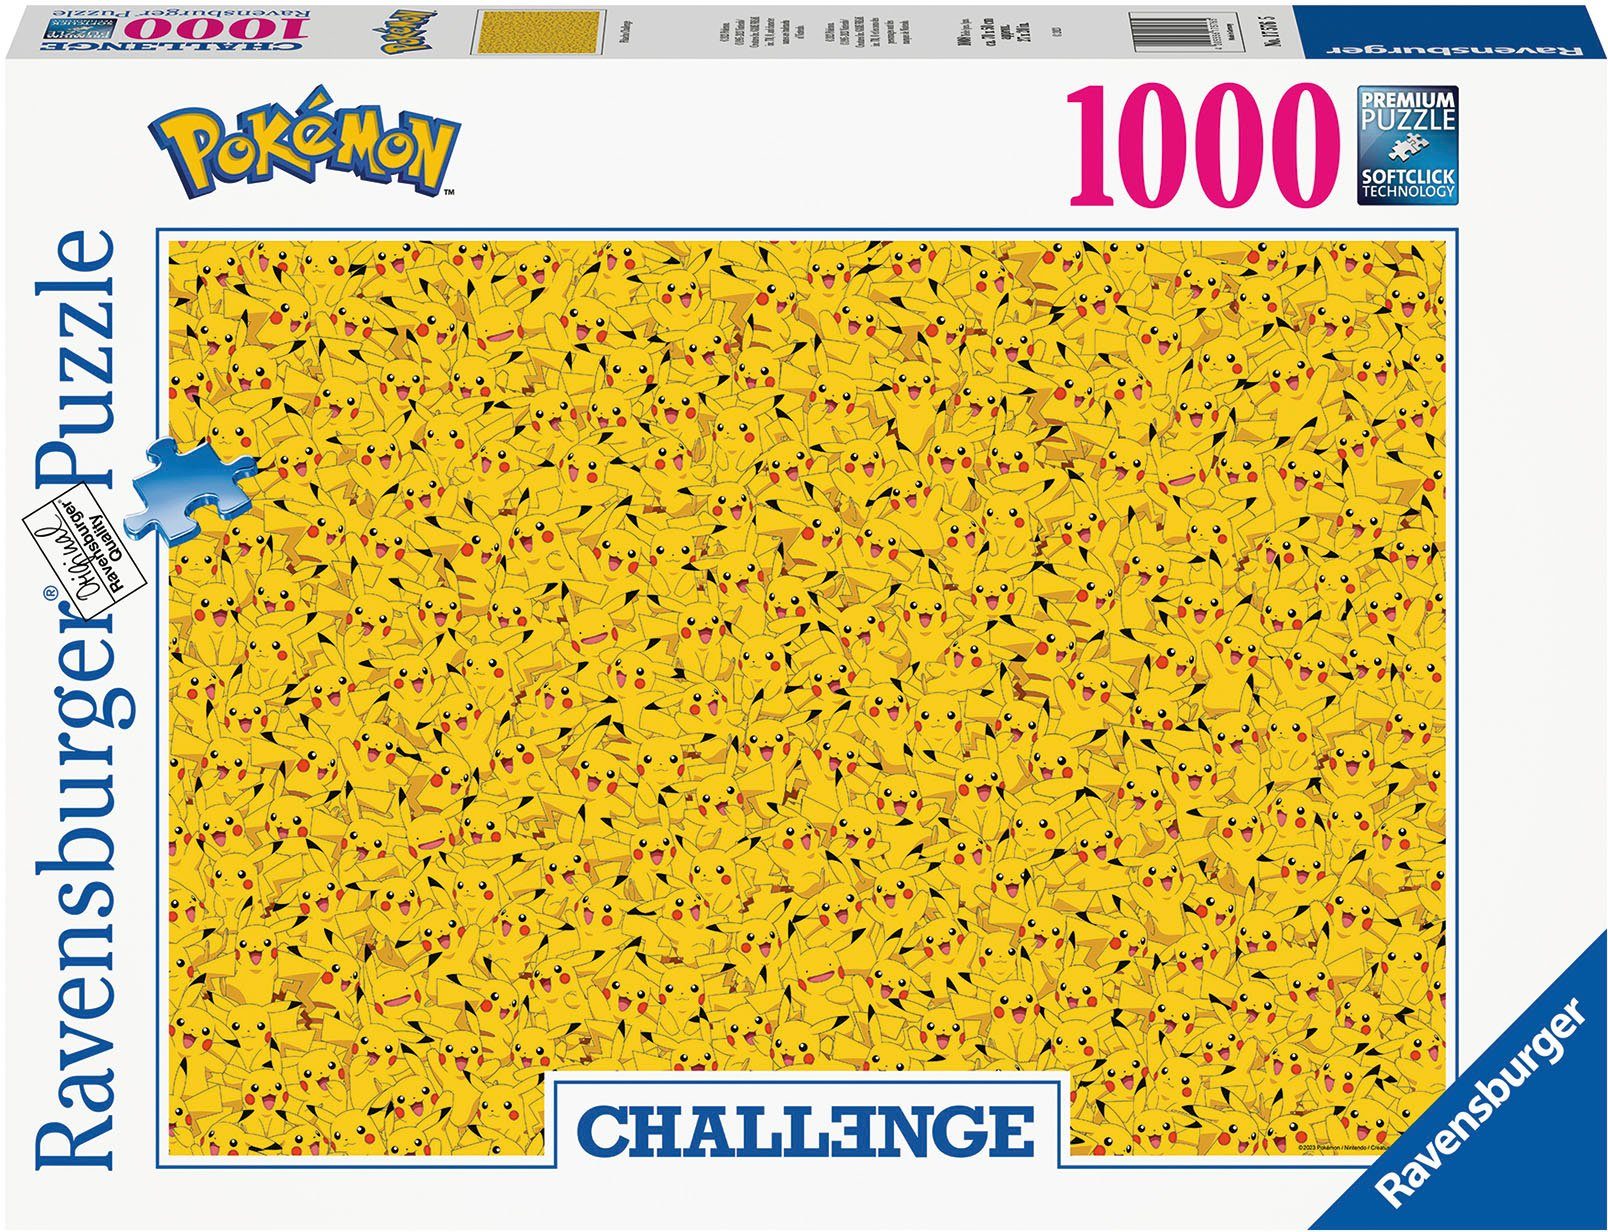 Germany 1000 Ravensburger Puzzleteile, in Made Pikachu, Puzzle Challenge,